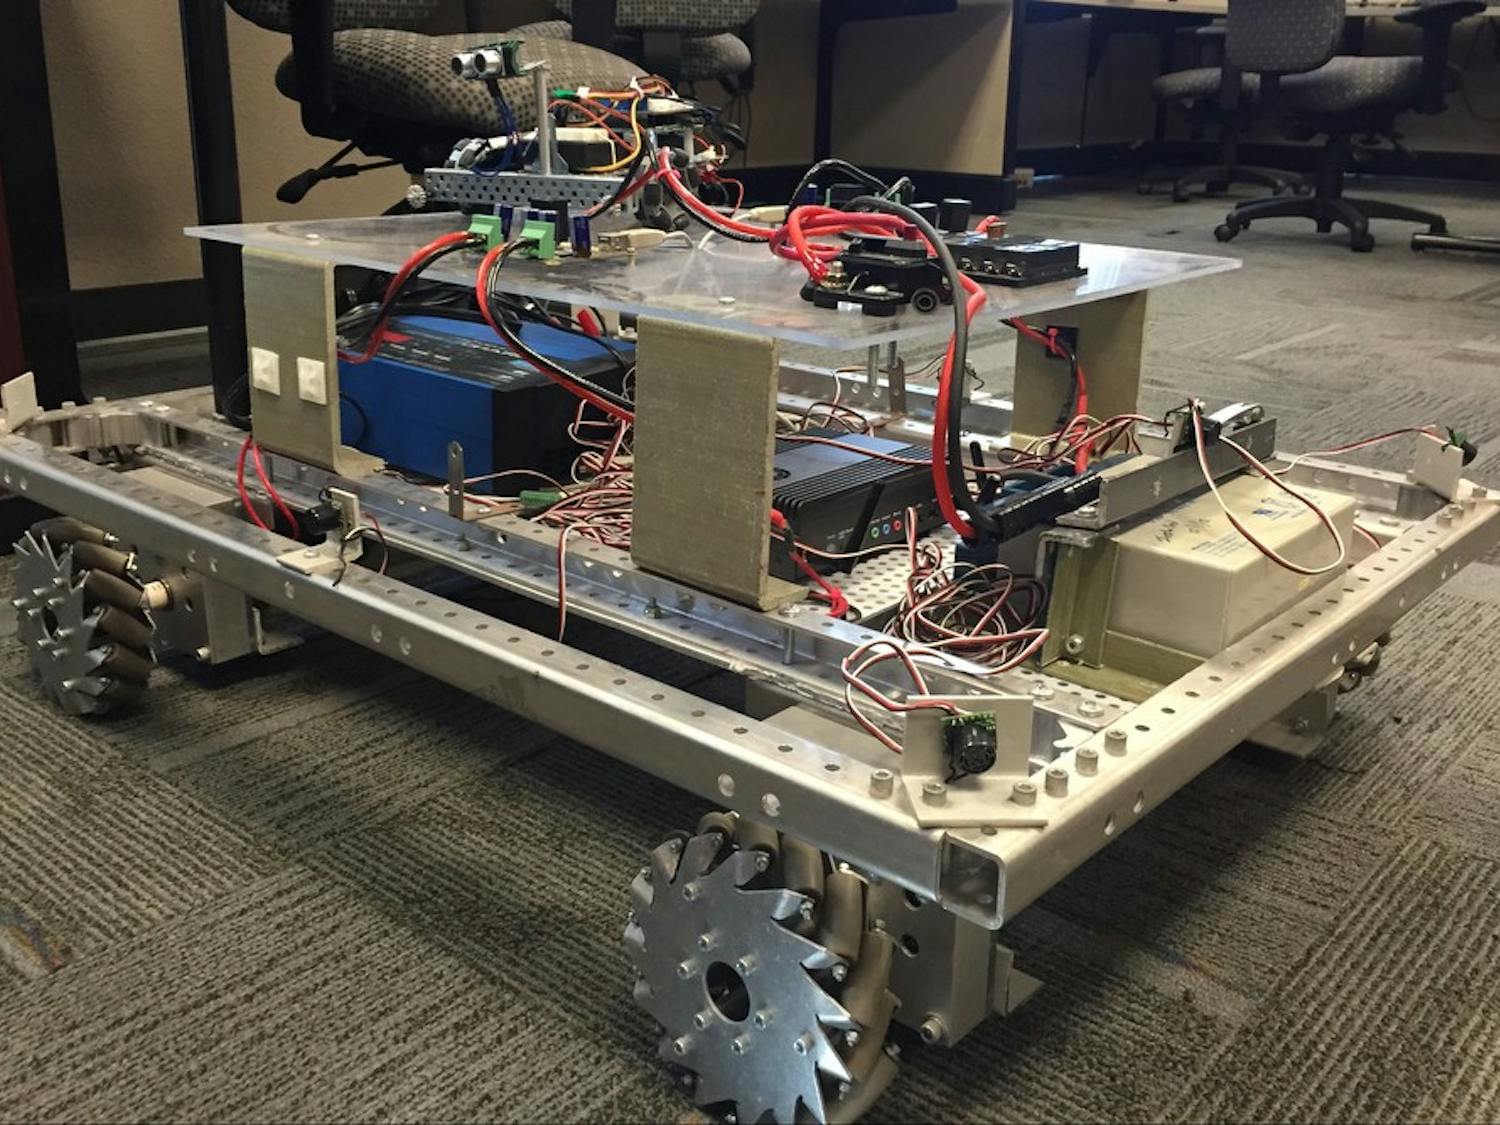 The Sun Devil Robotics Club works on about five hands-on robotics projects at a time and enters competitions both nationally and internationally with their completed robots like the one seen above.